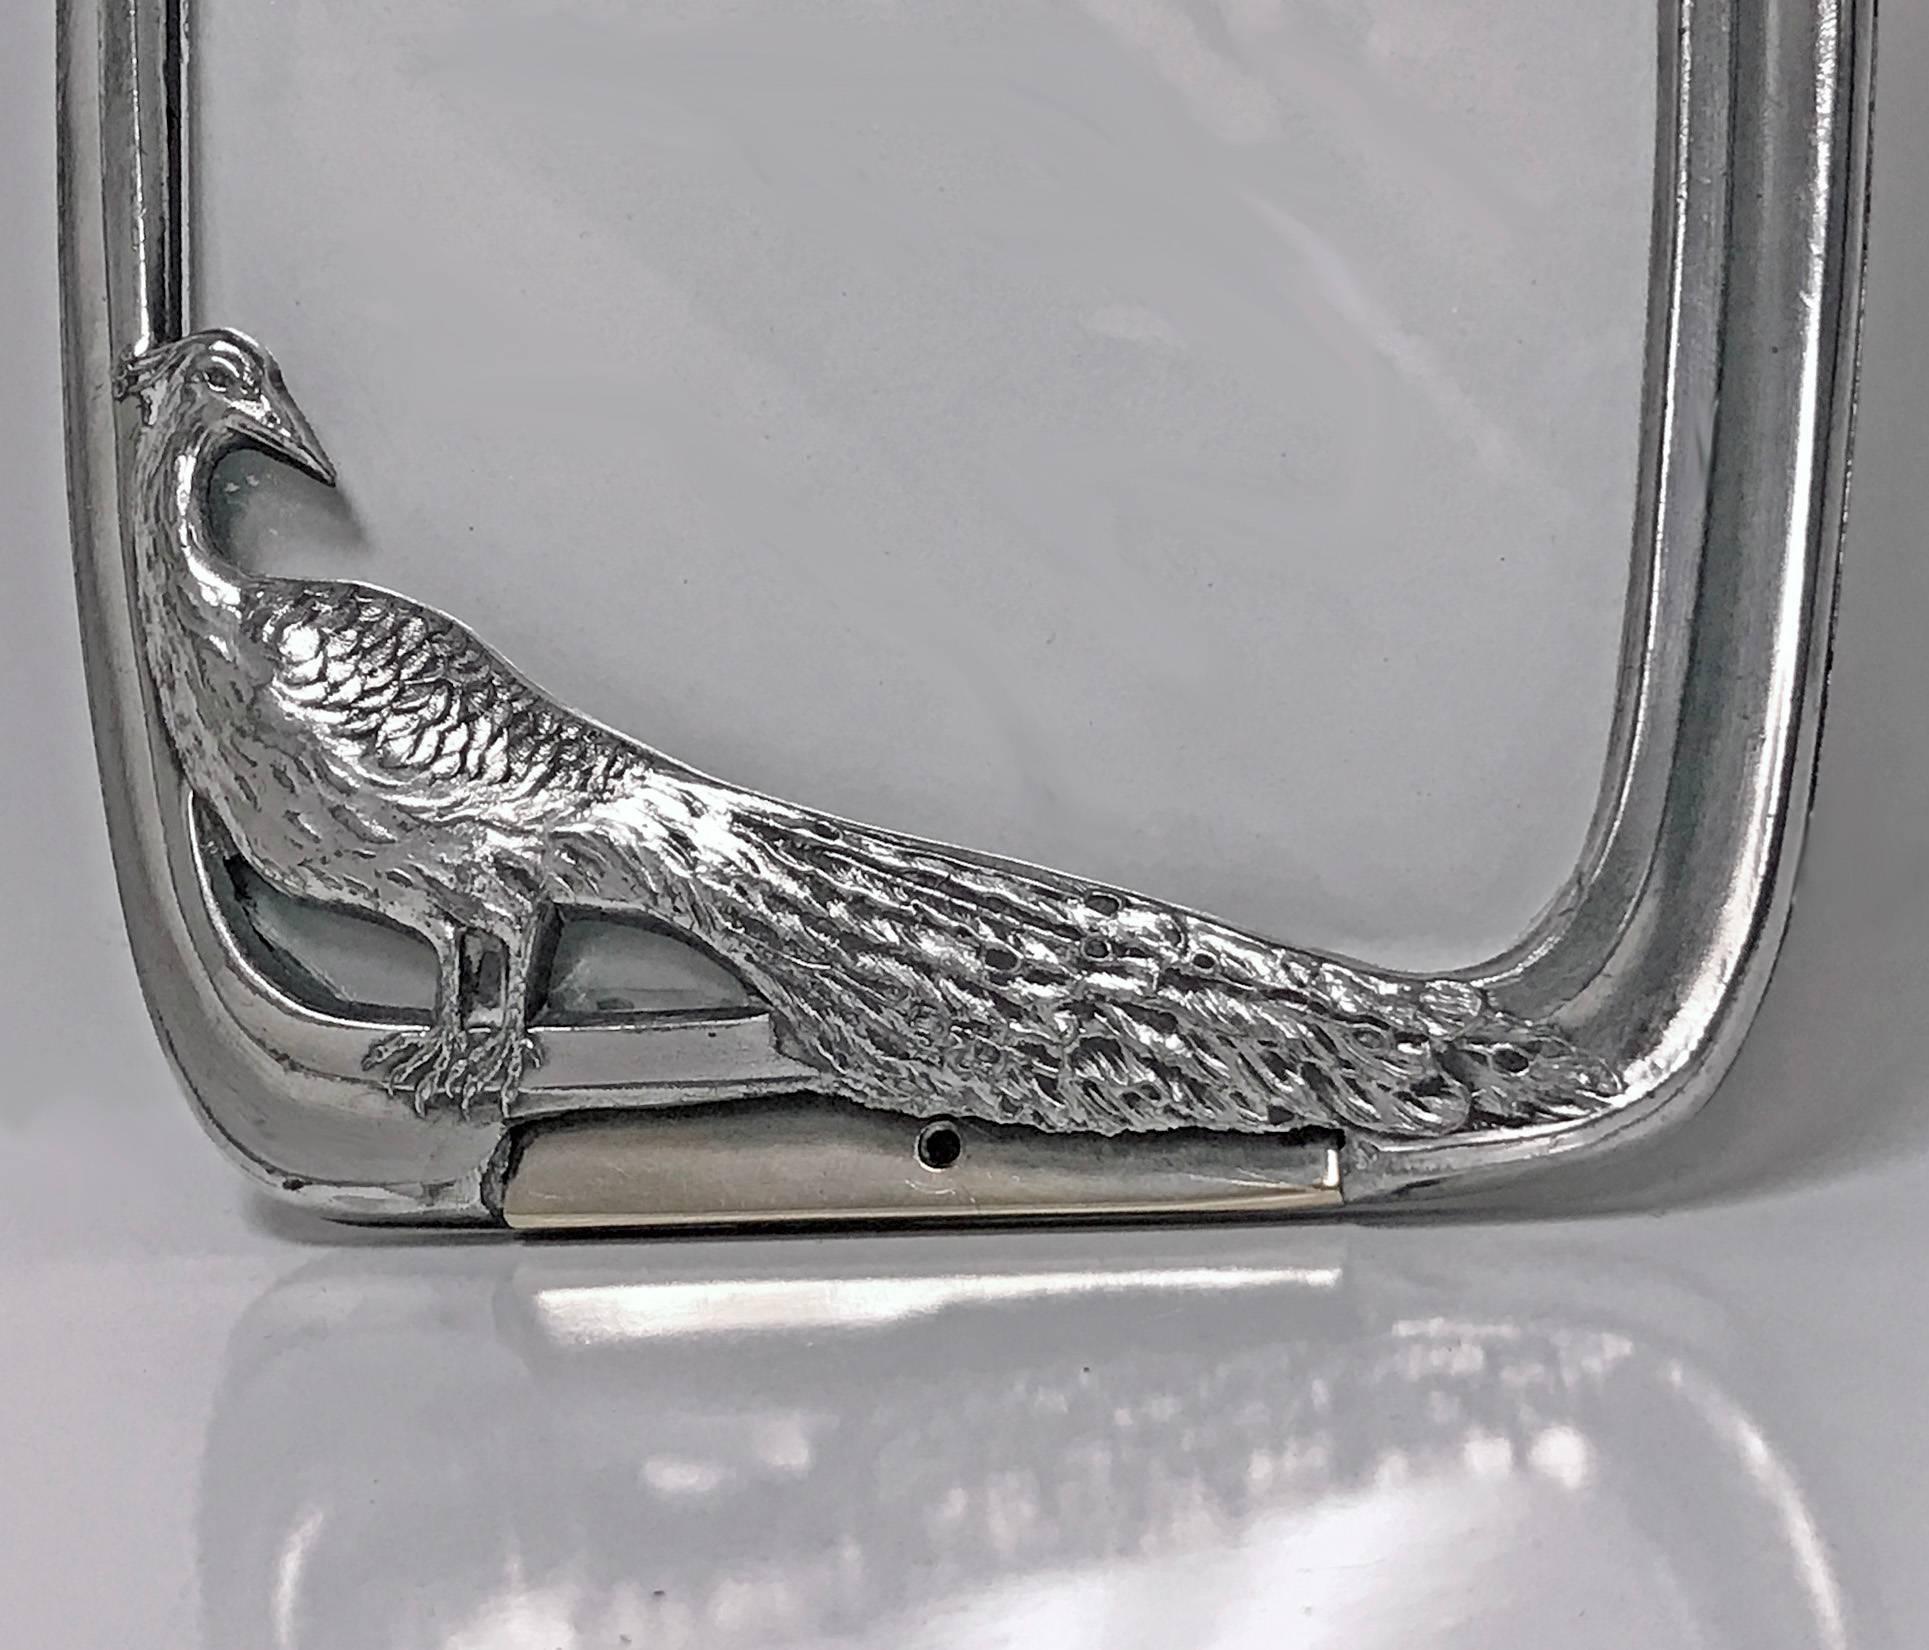 Art Nouveau Jugendstil Peacock Photograph Frame, Argentor, Austria C.1900. The frame of a plain stylised art nouveau curvilinear border with a peacock realistically textured at lower left side. Original back and easel, stamped with marks for